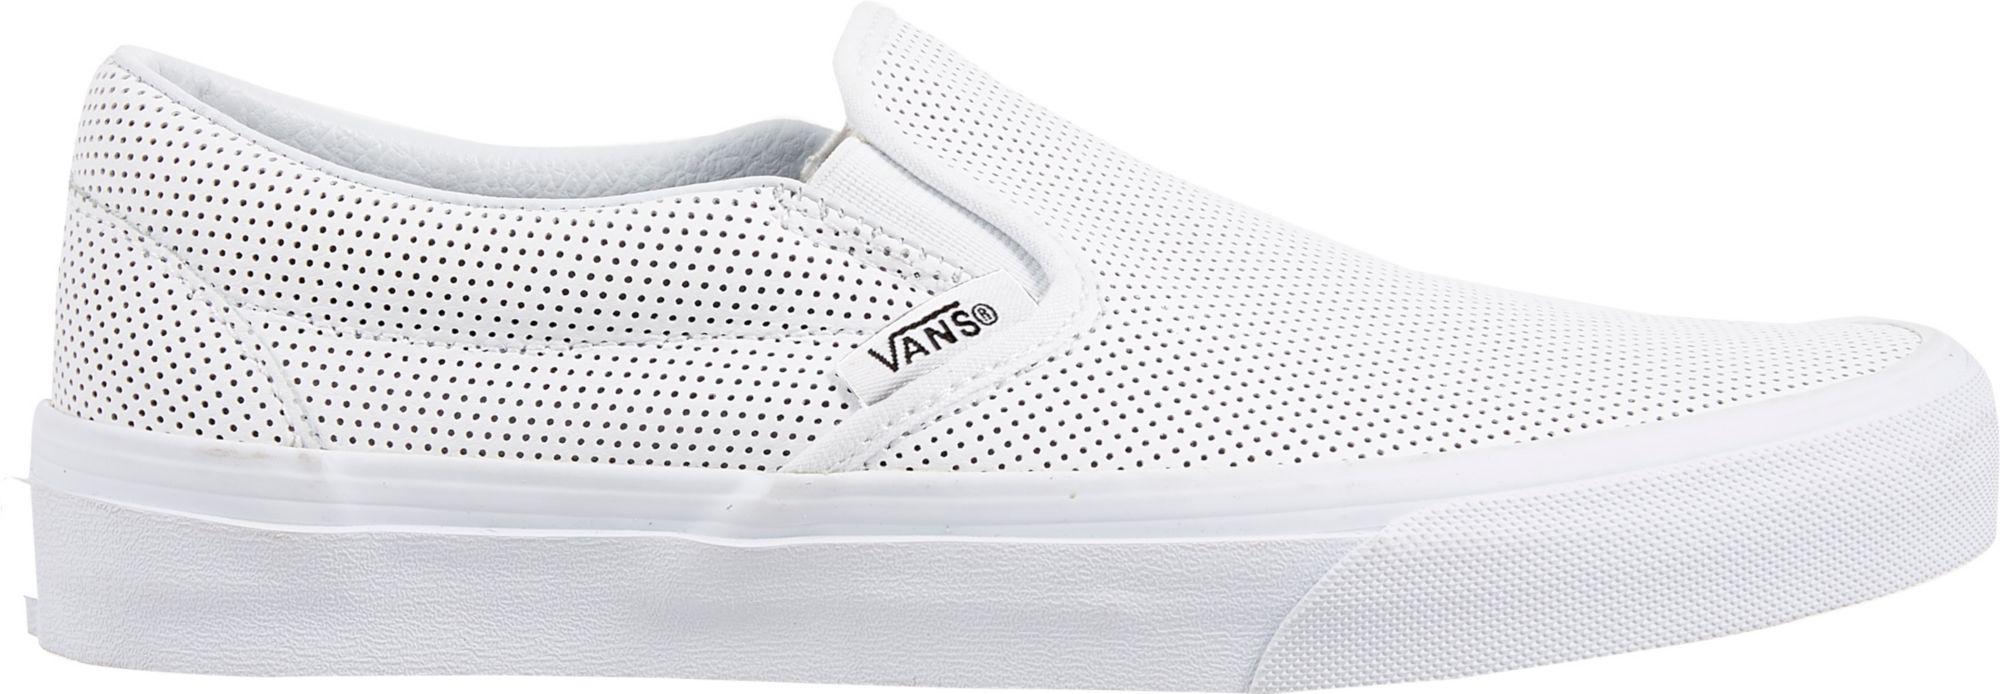 perf leather white vans